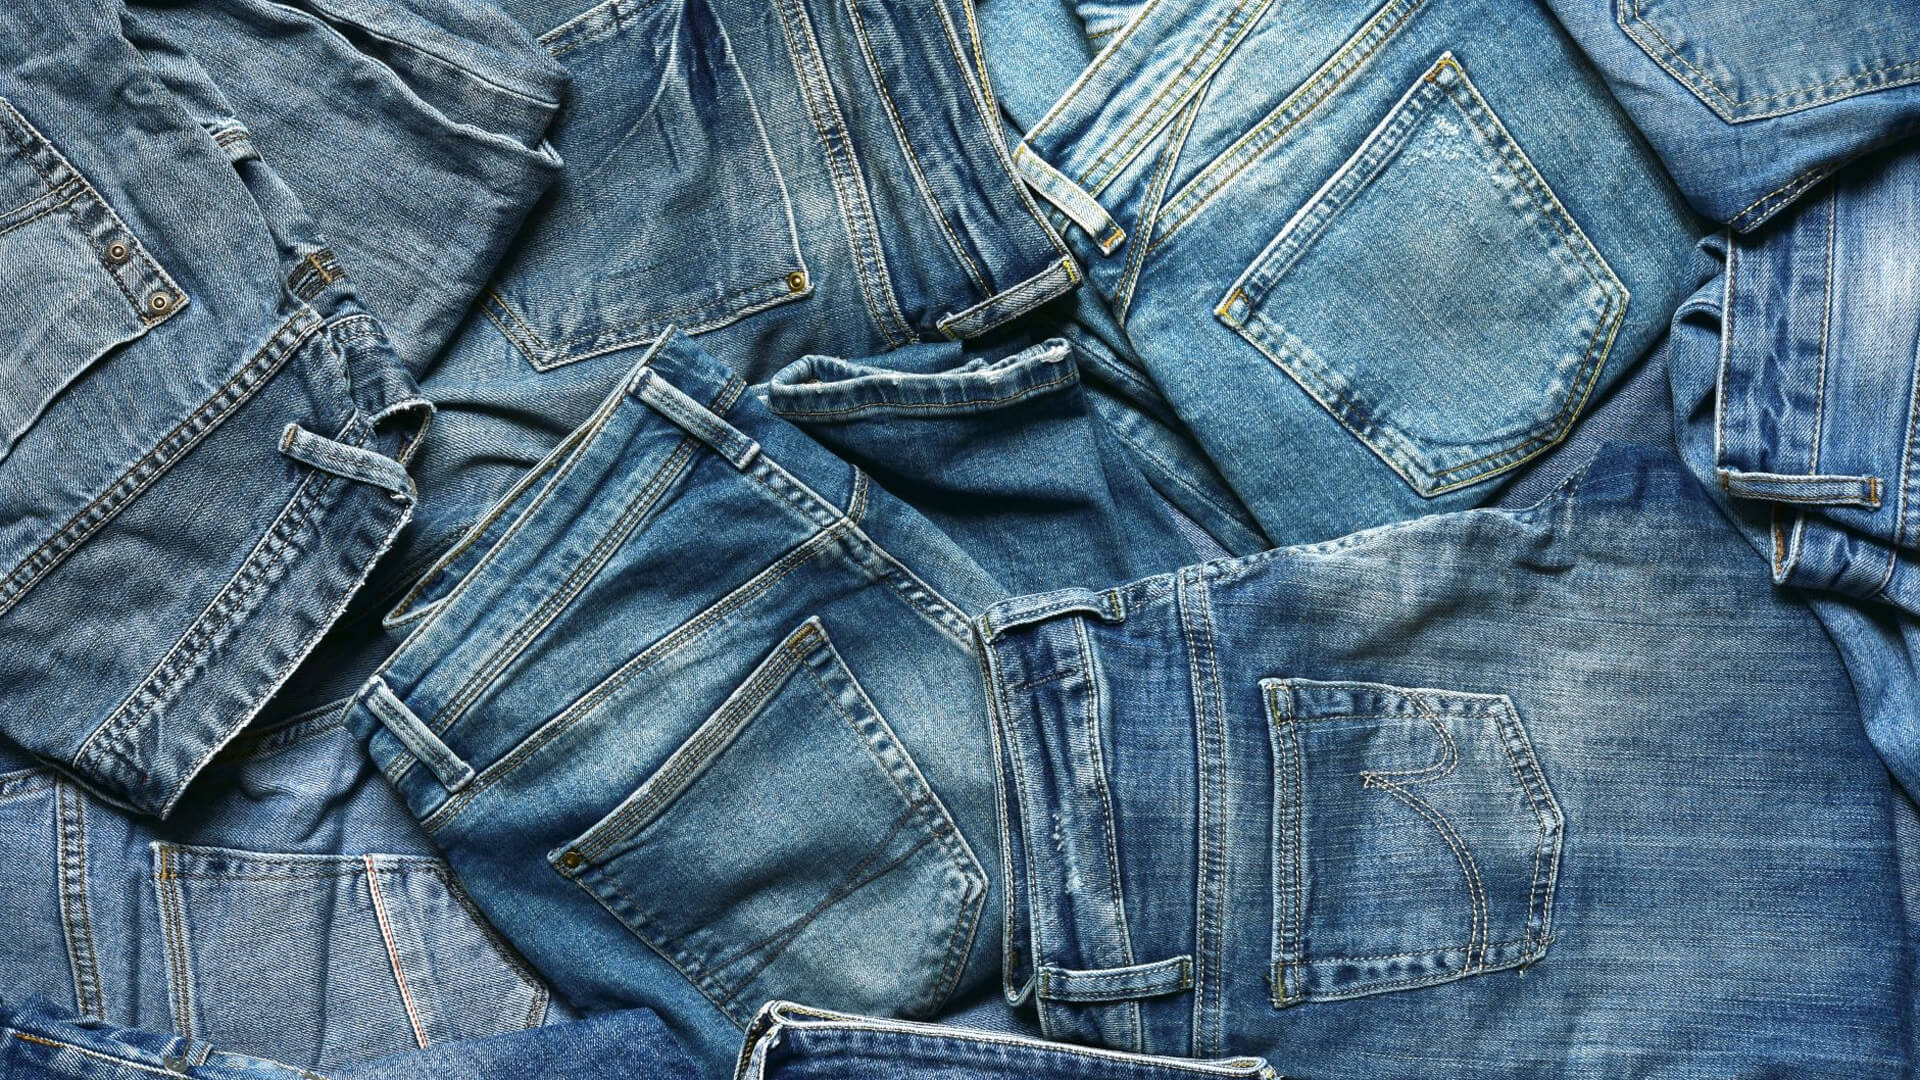 Massachusetts ban stops residents from throwing away old jeans